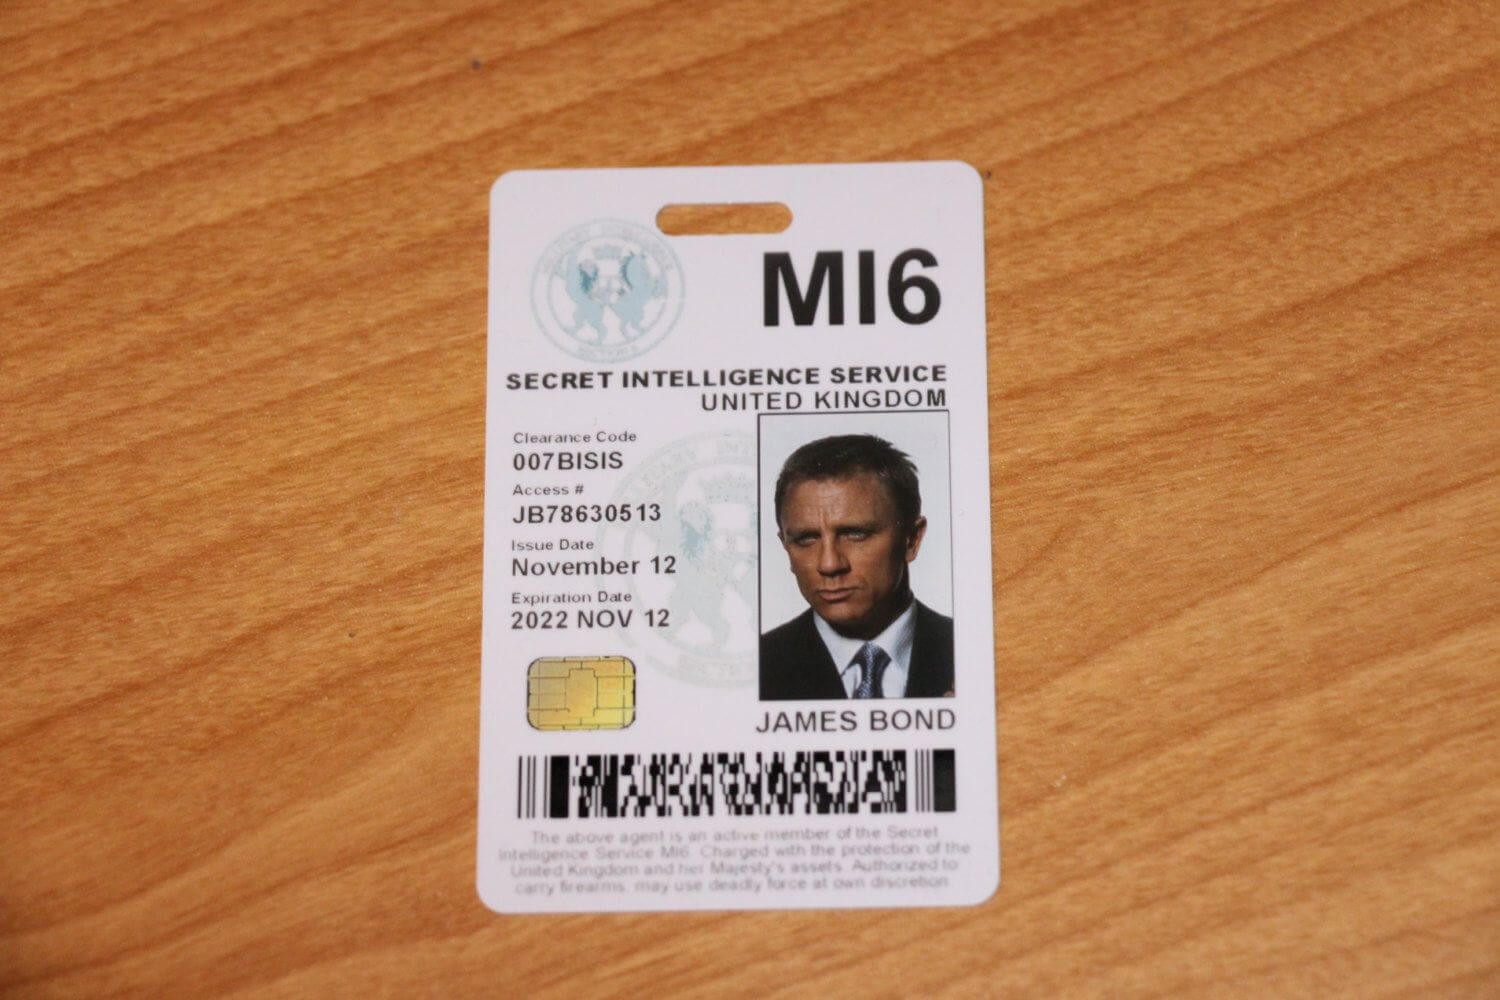 Pinmasterjoelee On Silver Eagles | Hank Schrader, Badge With Regard To Mi6 Id Card Template